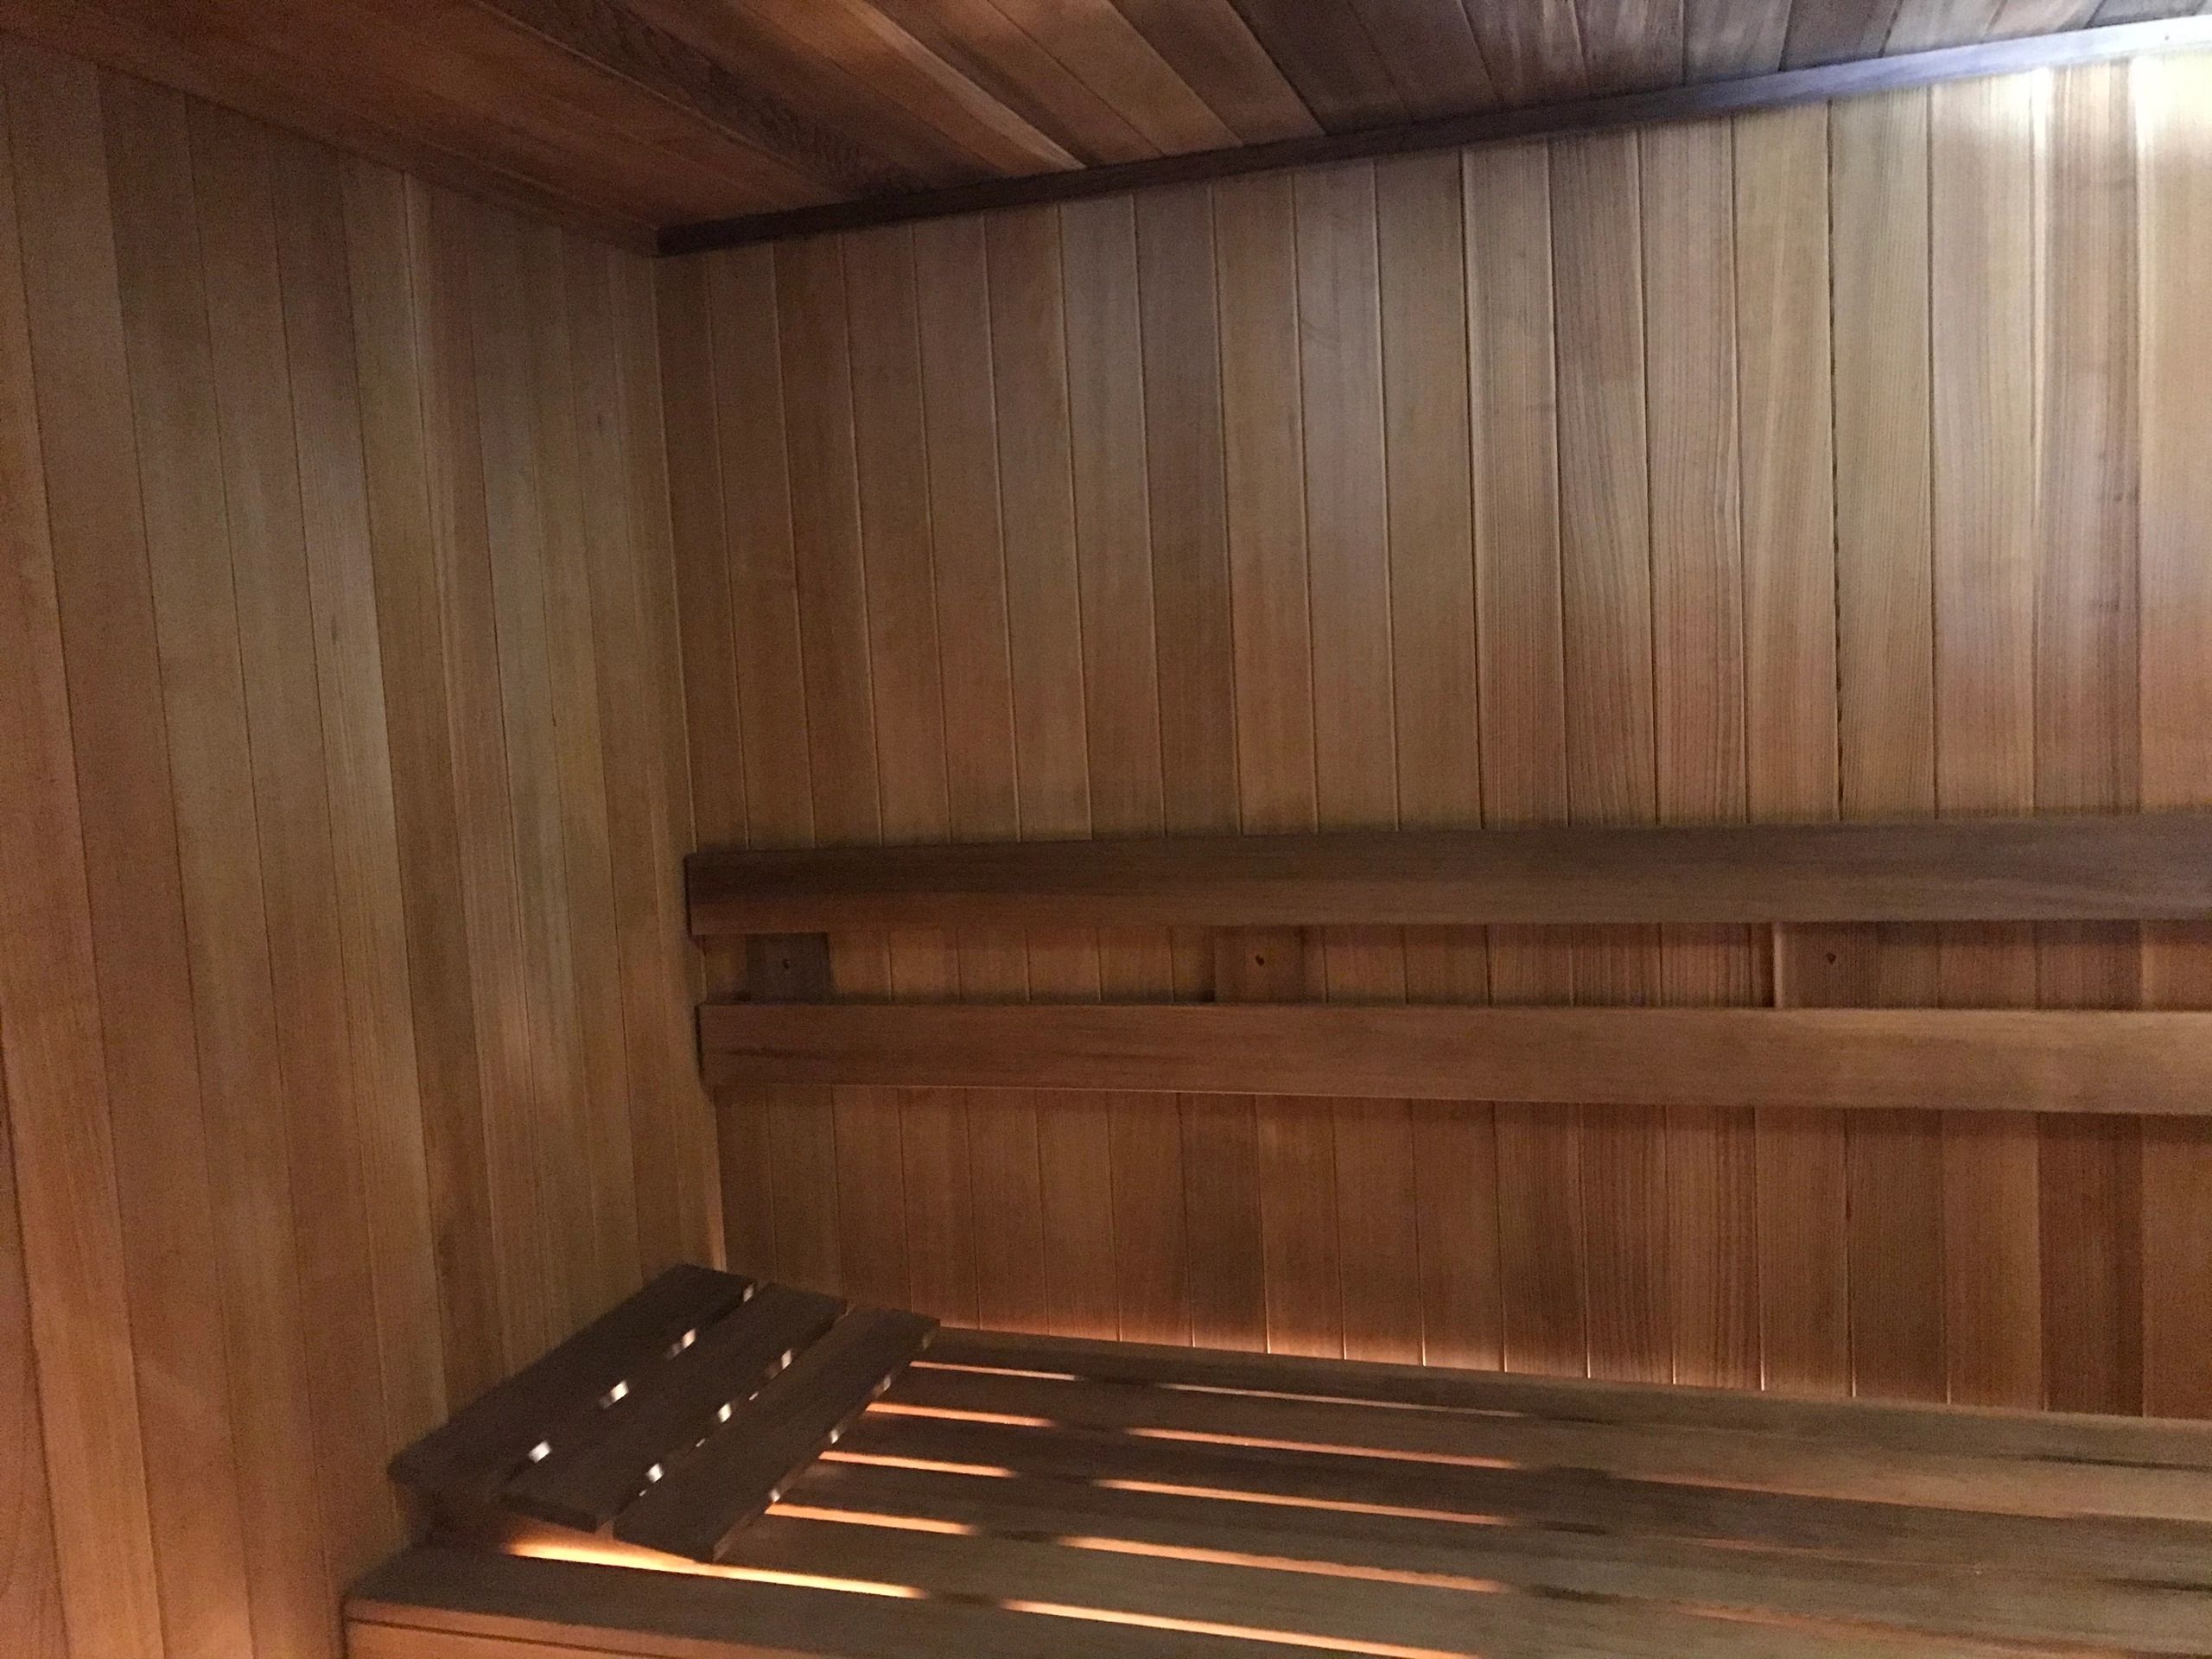 The refinished and oiled wood inside the sauna